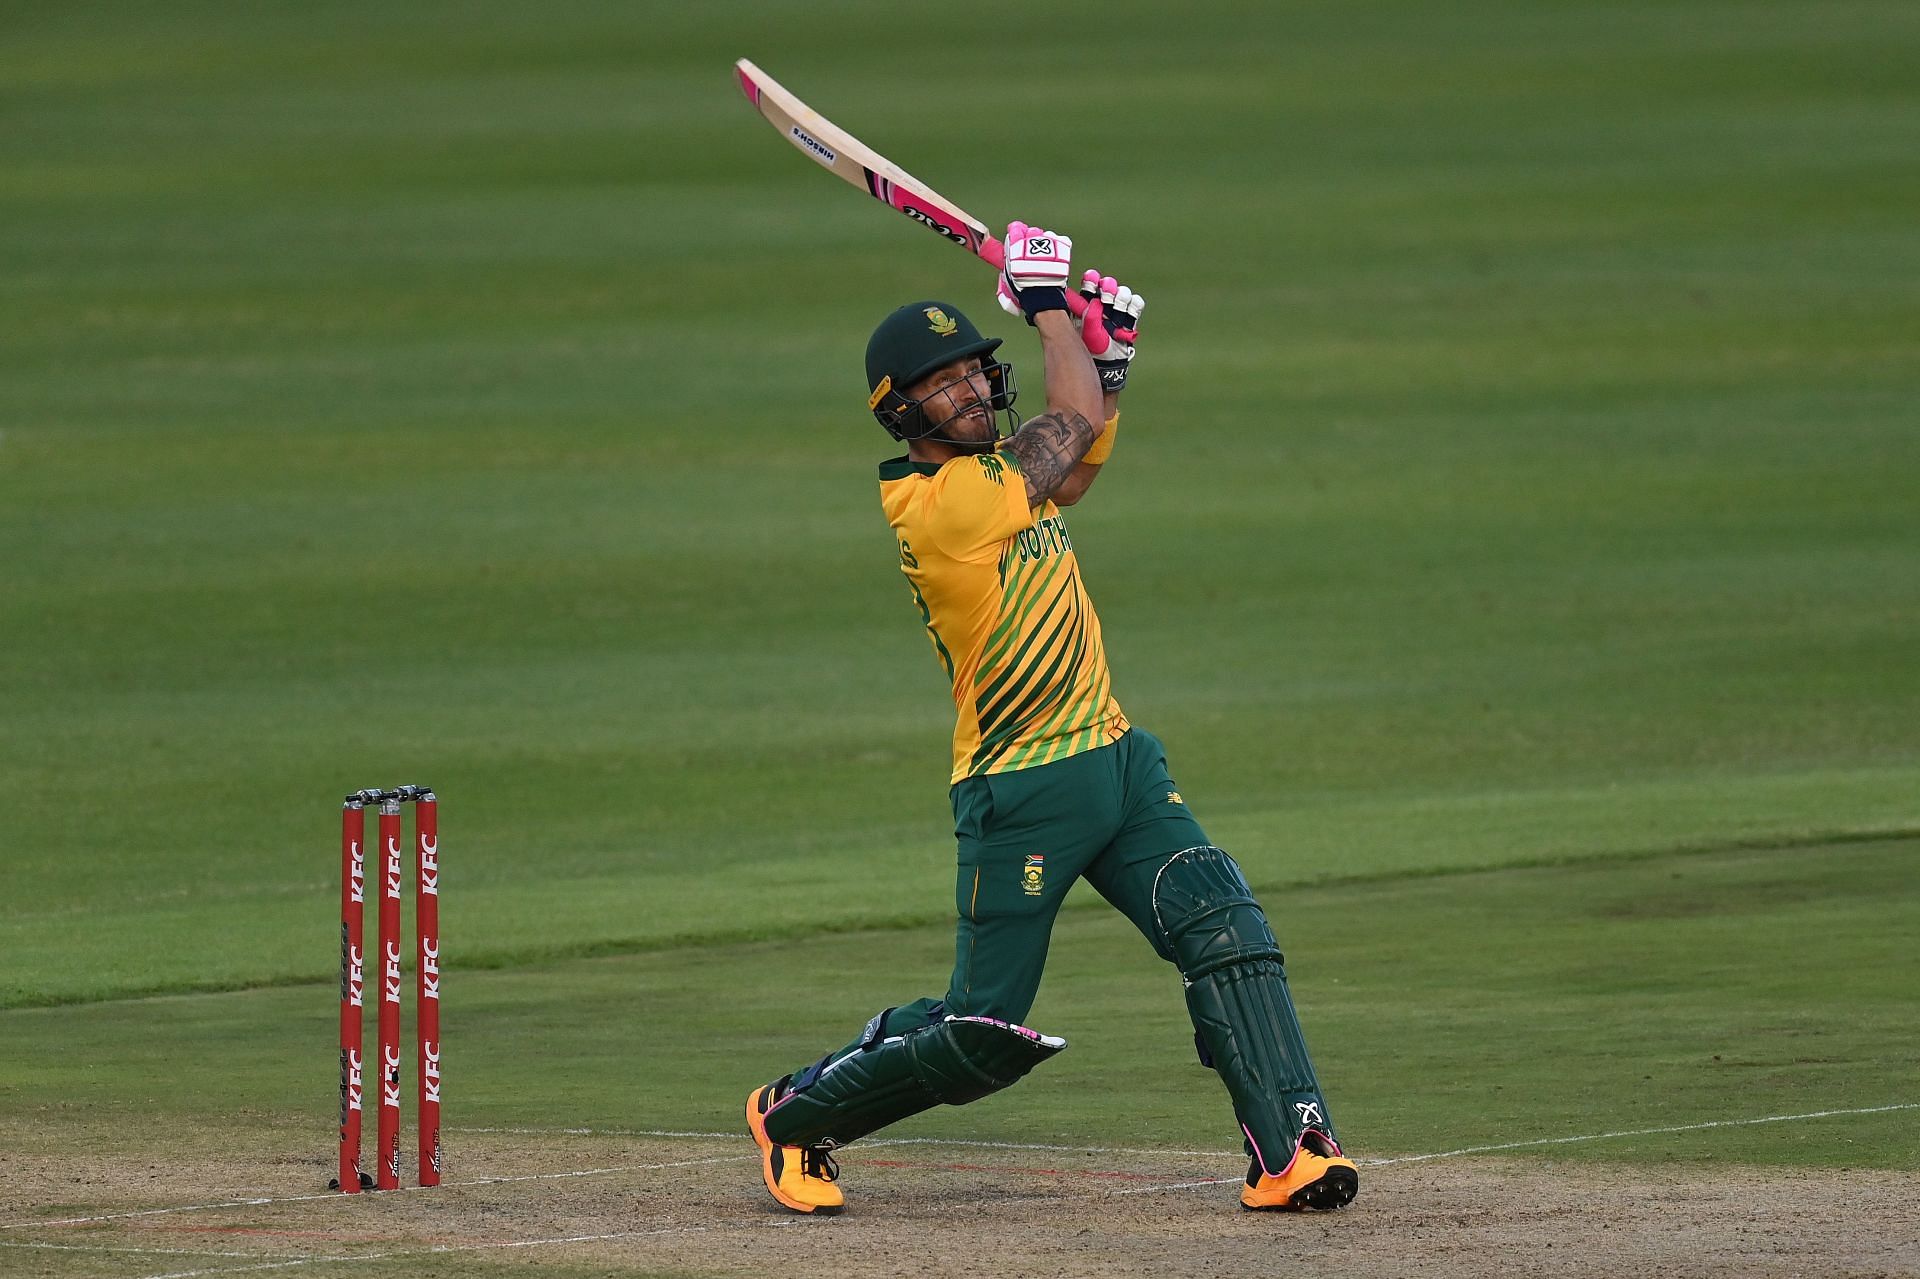 Faf du Plessis is yet to hit top gear so far this season